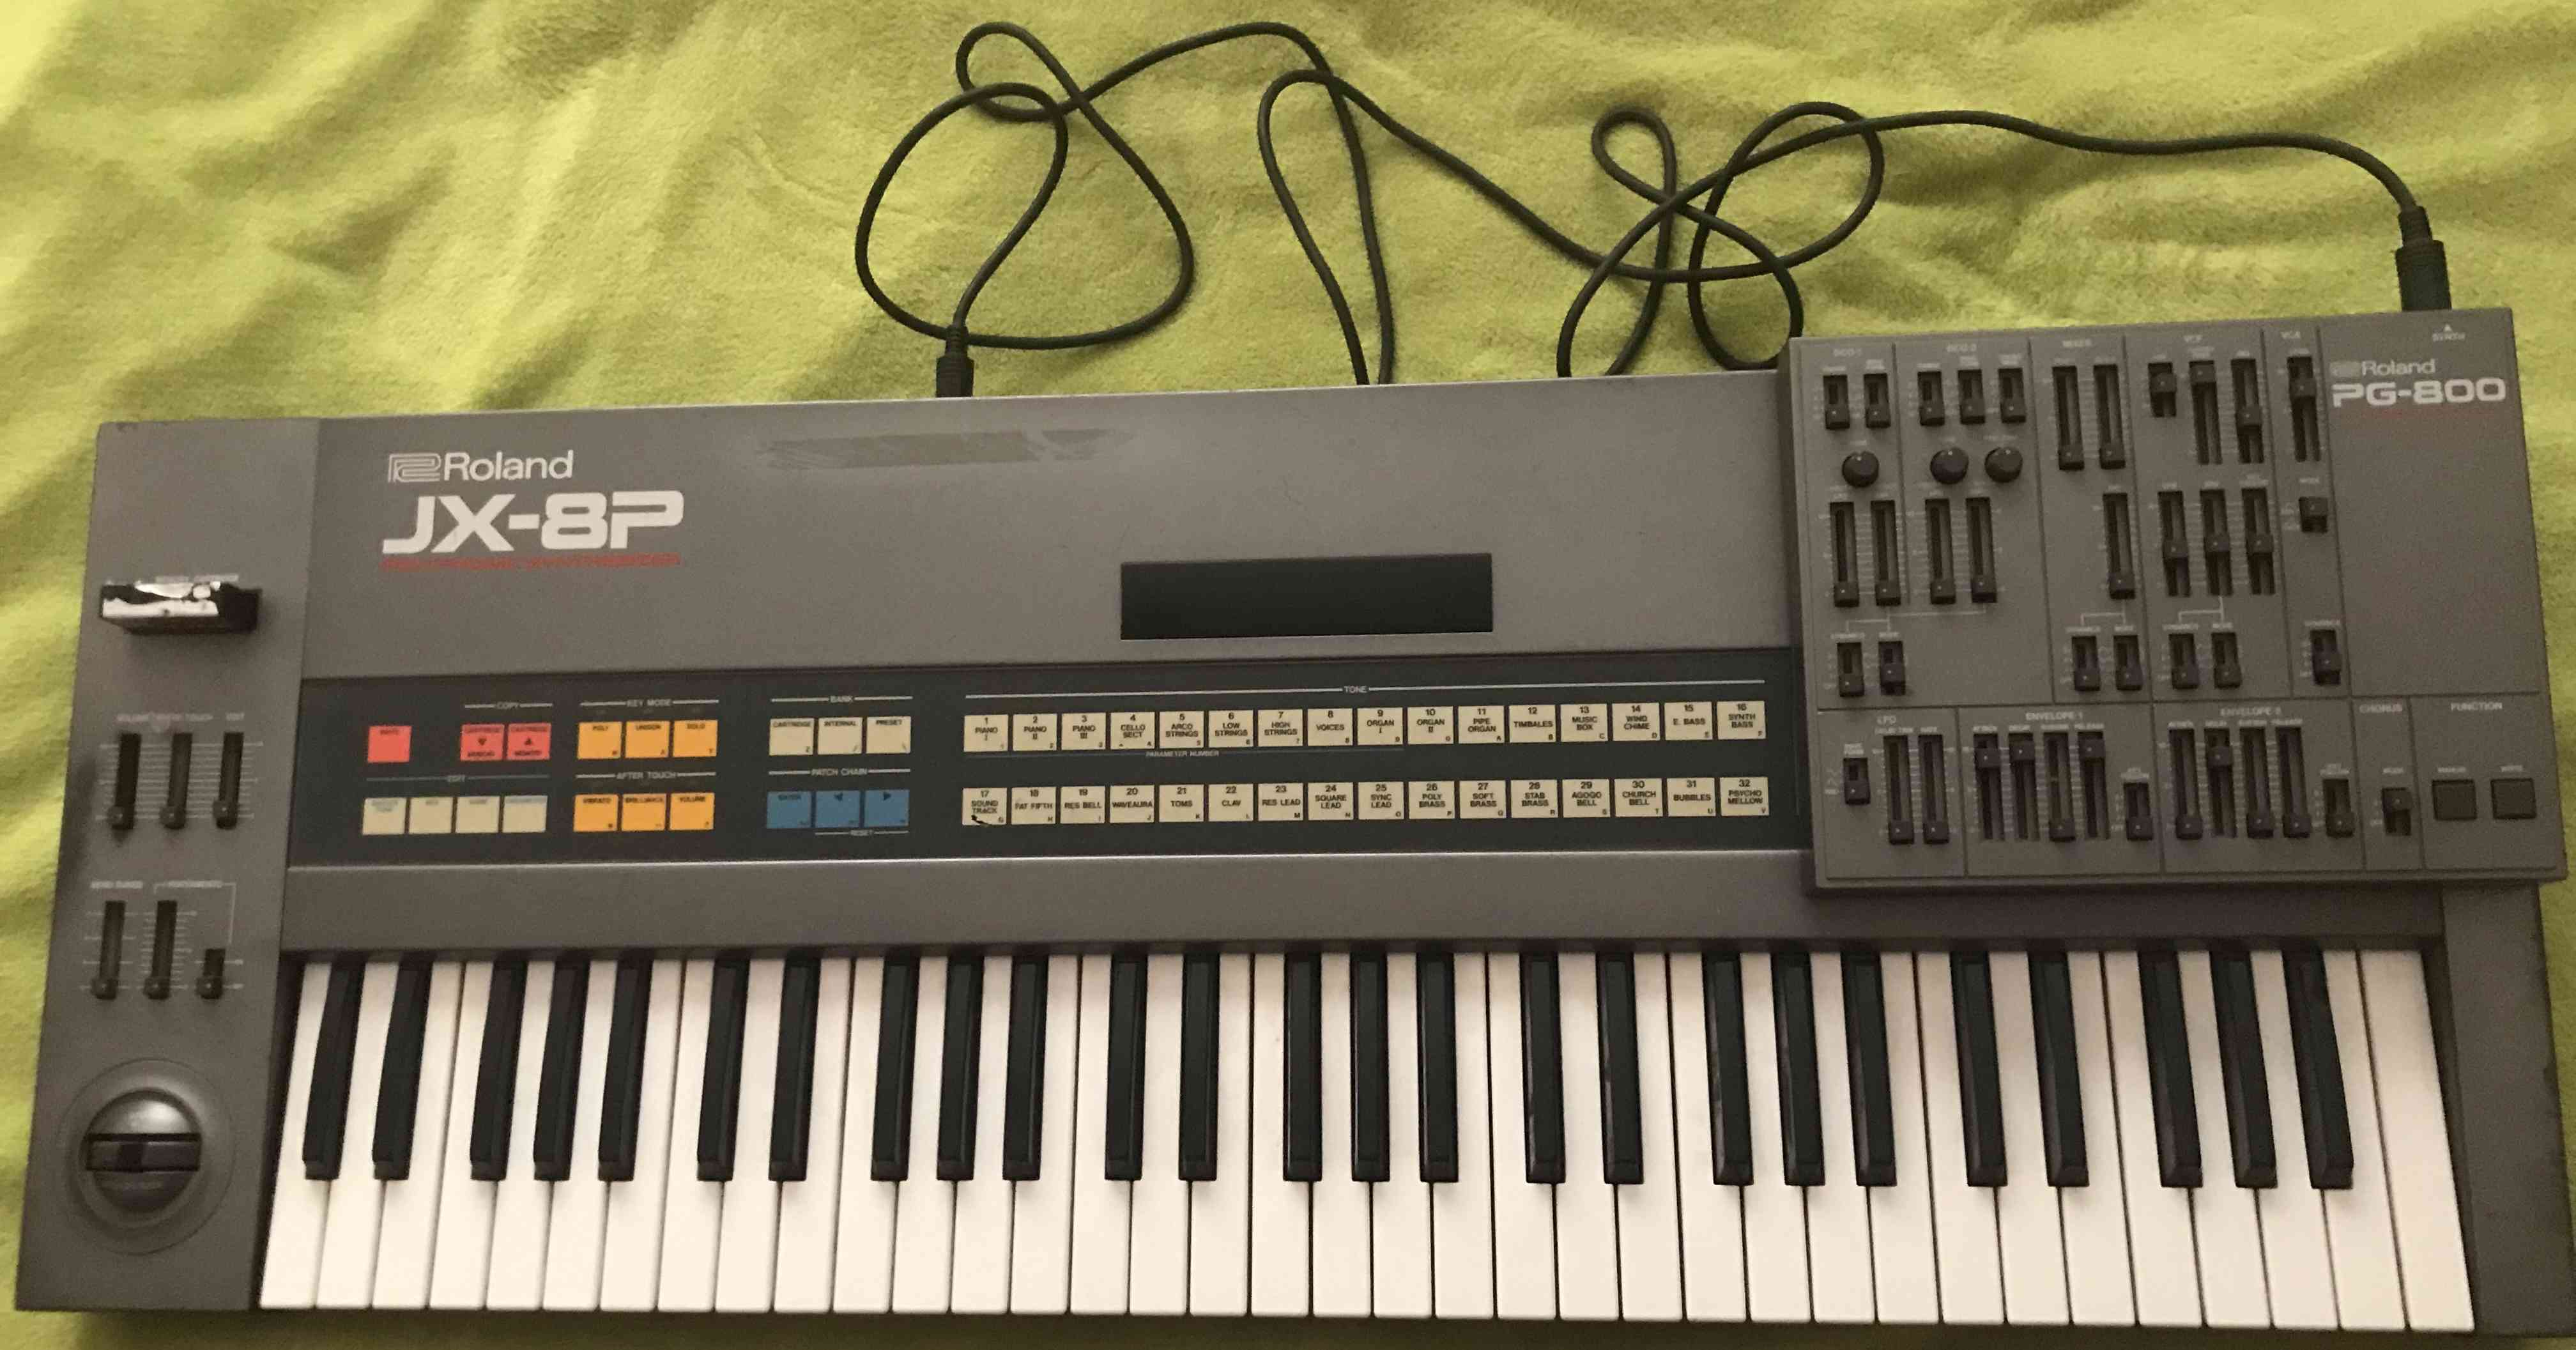 PG-800 Synth Programmer - Roland PG-800 Synth Programmer